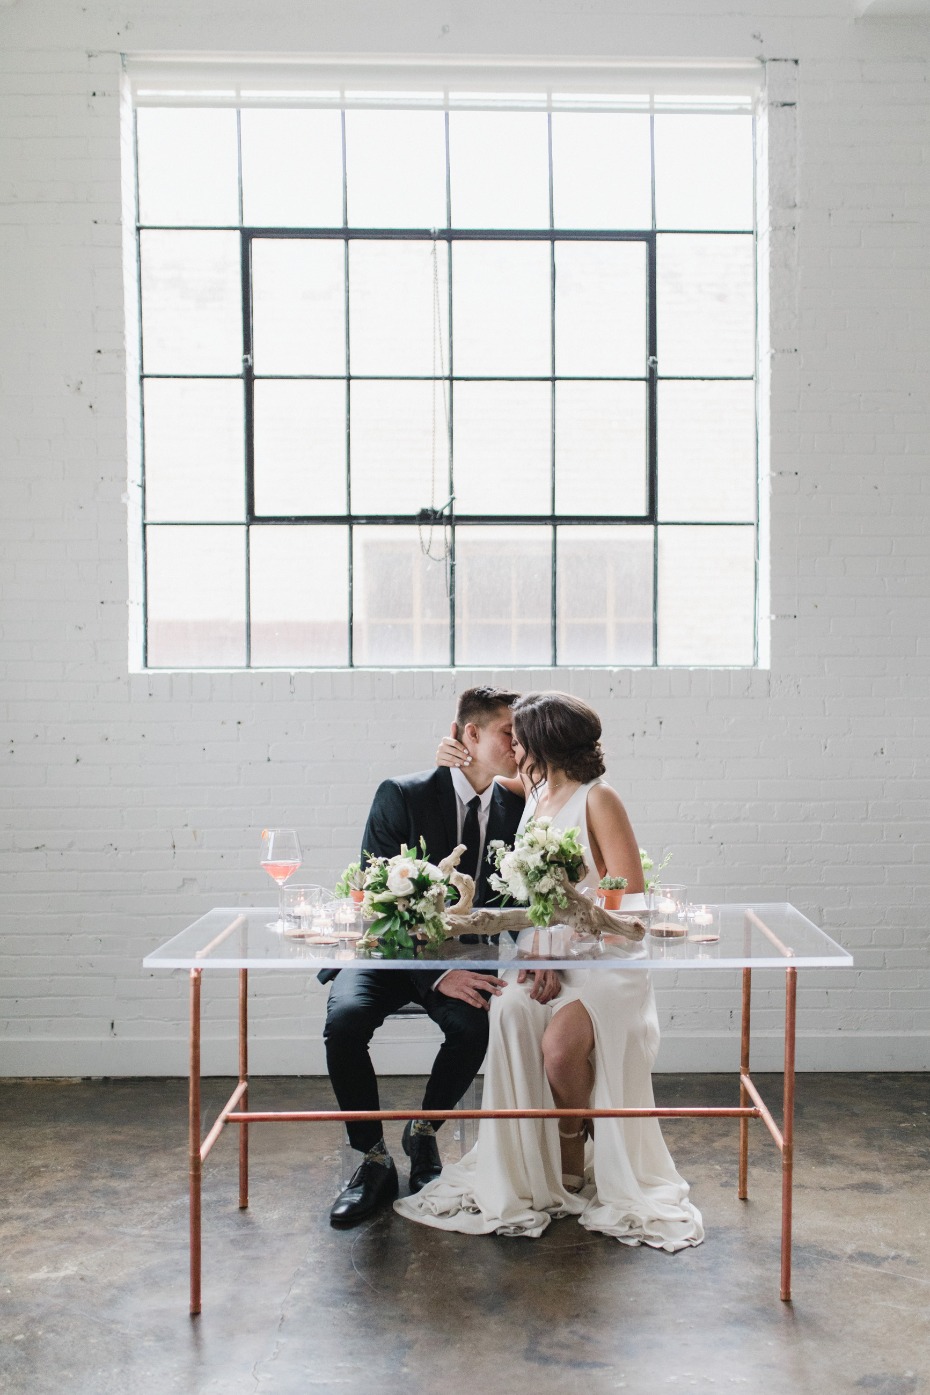 Modern wedding ideas that are a must-see